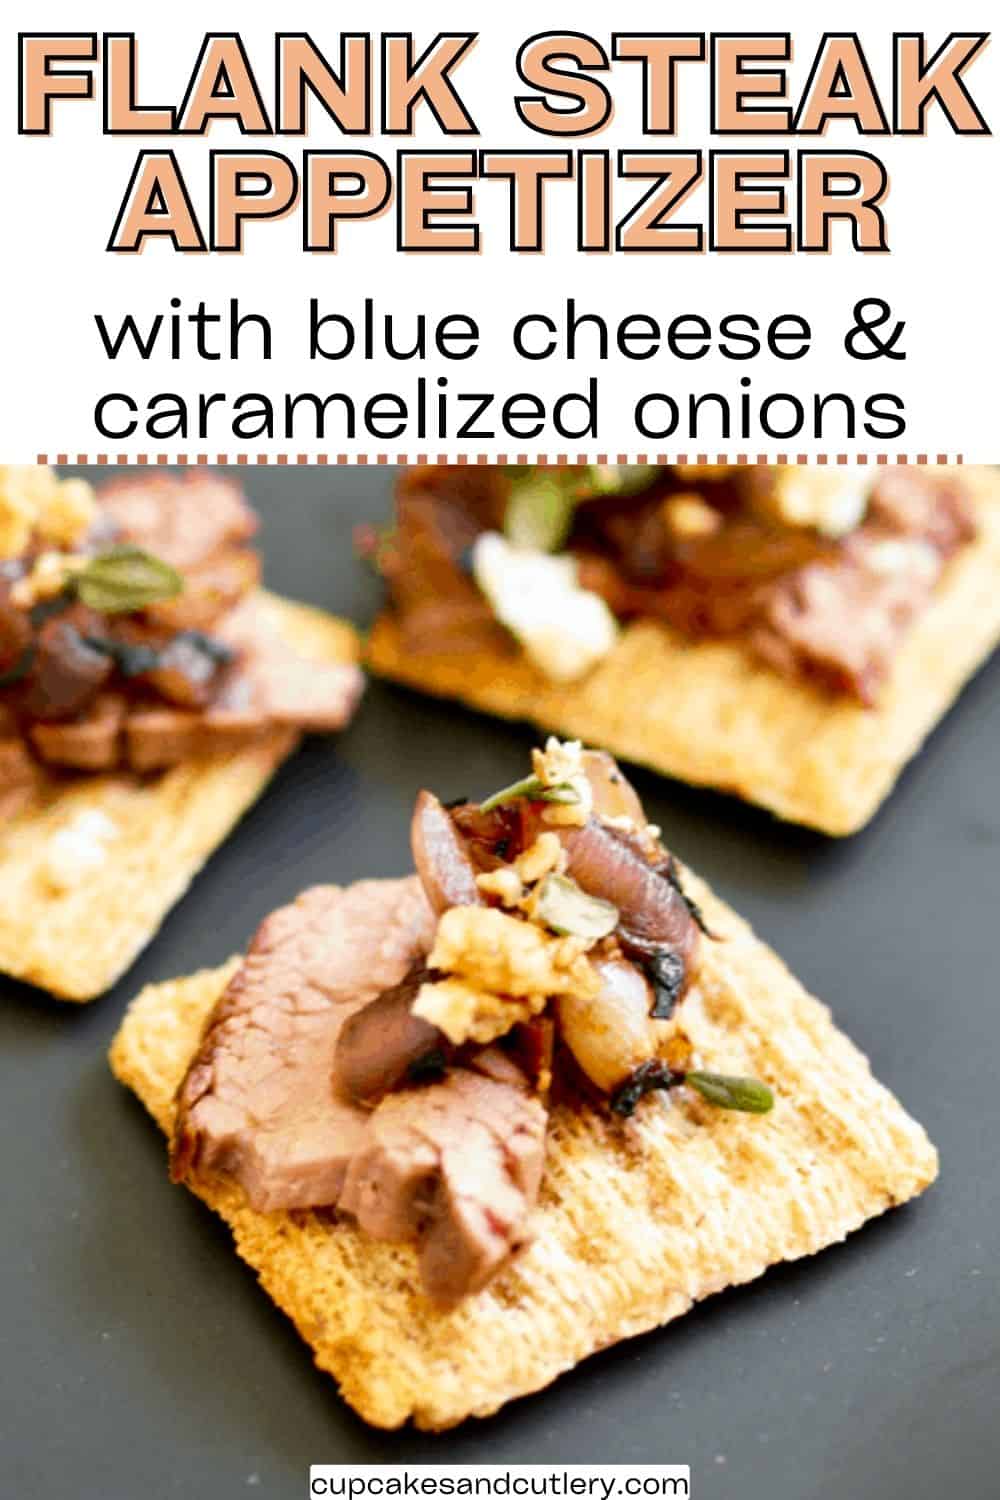 Text: Flank steak appetizer with a few Triscuit crackers on a plate topped with steak, blue cheese and onions.